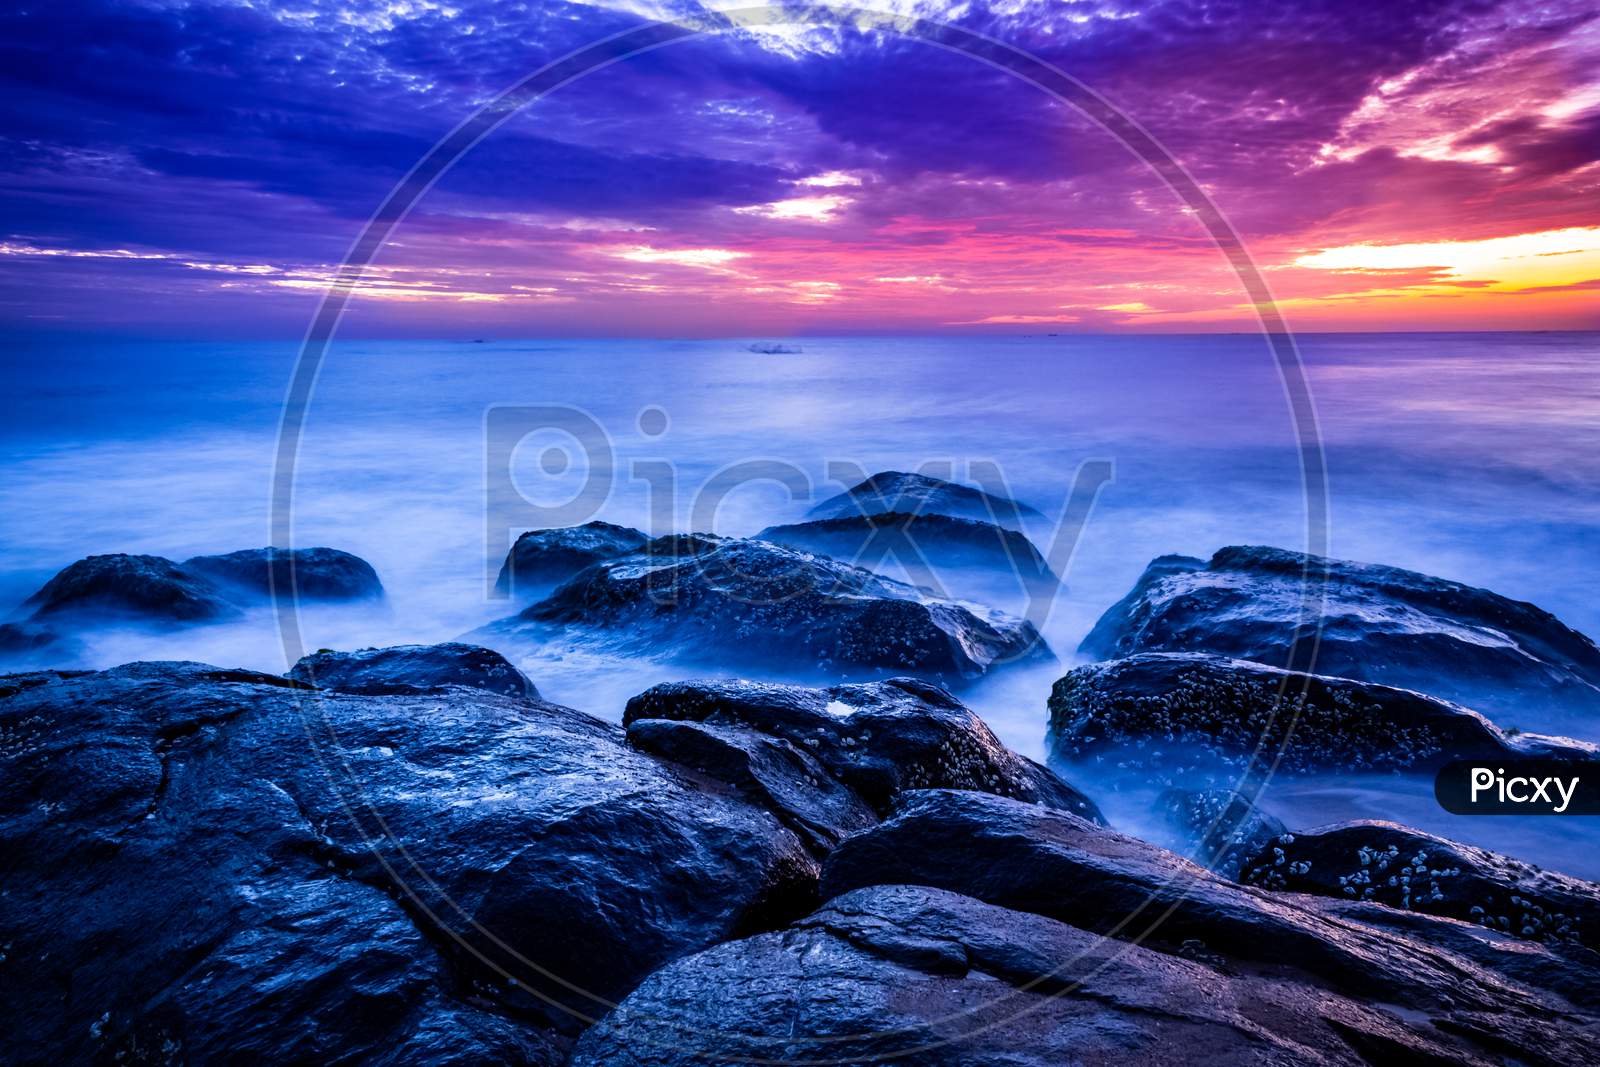 Beautiful Sunrise Over The Beach In Long Exposure. Moving Elements Sunrise And Wave Photography From The Rocky Beach In India. Red Sky In Bay Of Bengal , Slow-Shutter Sea Waves And Rocks Photography.